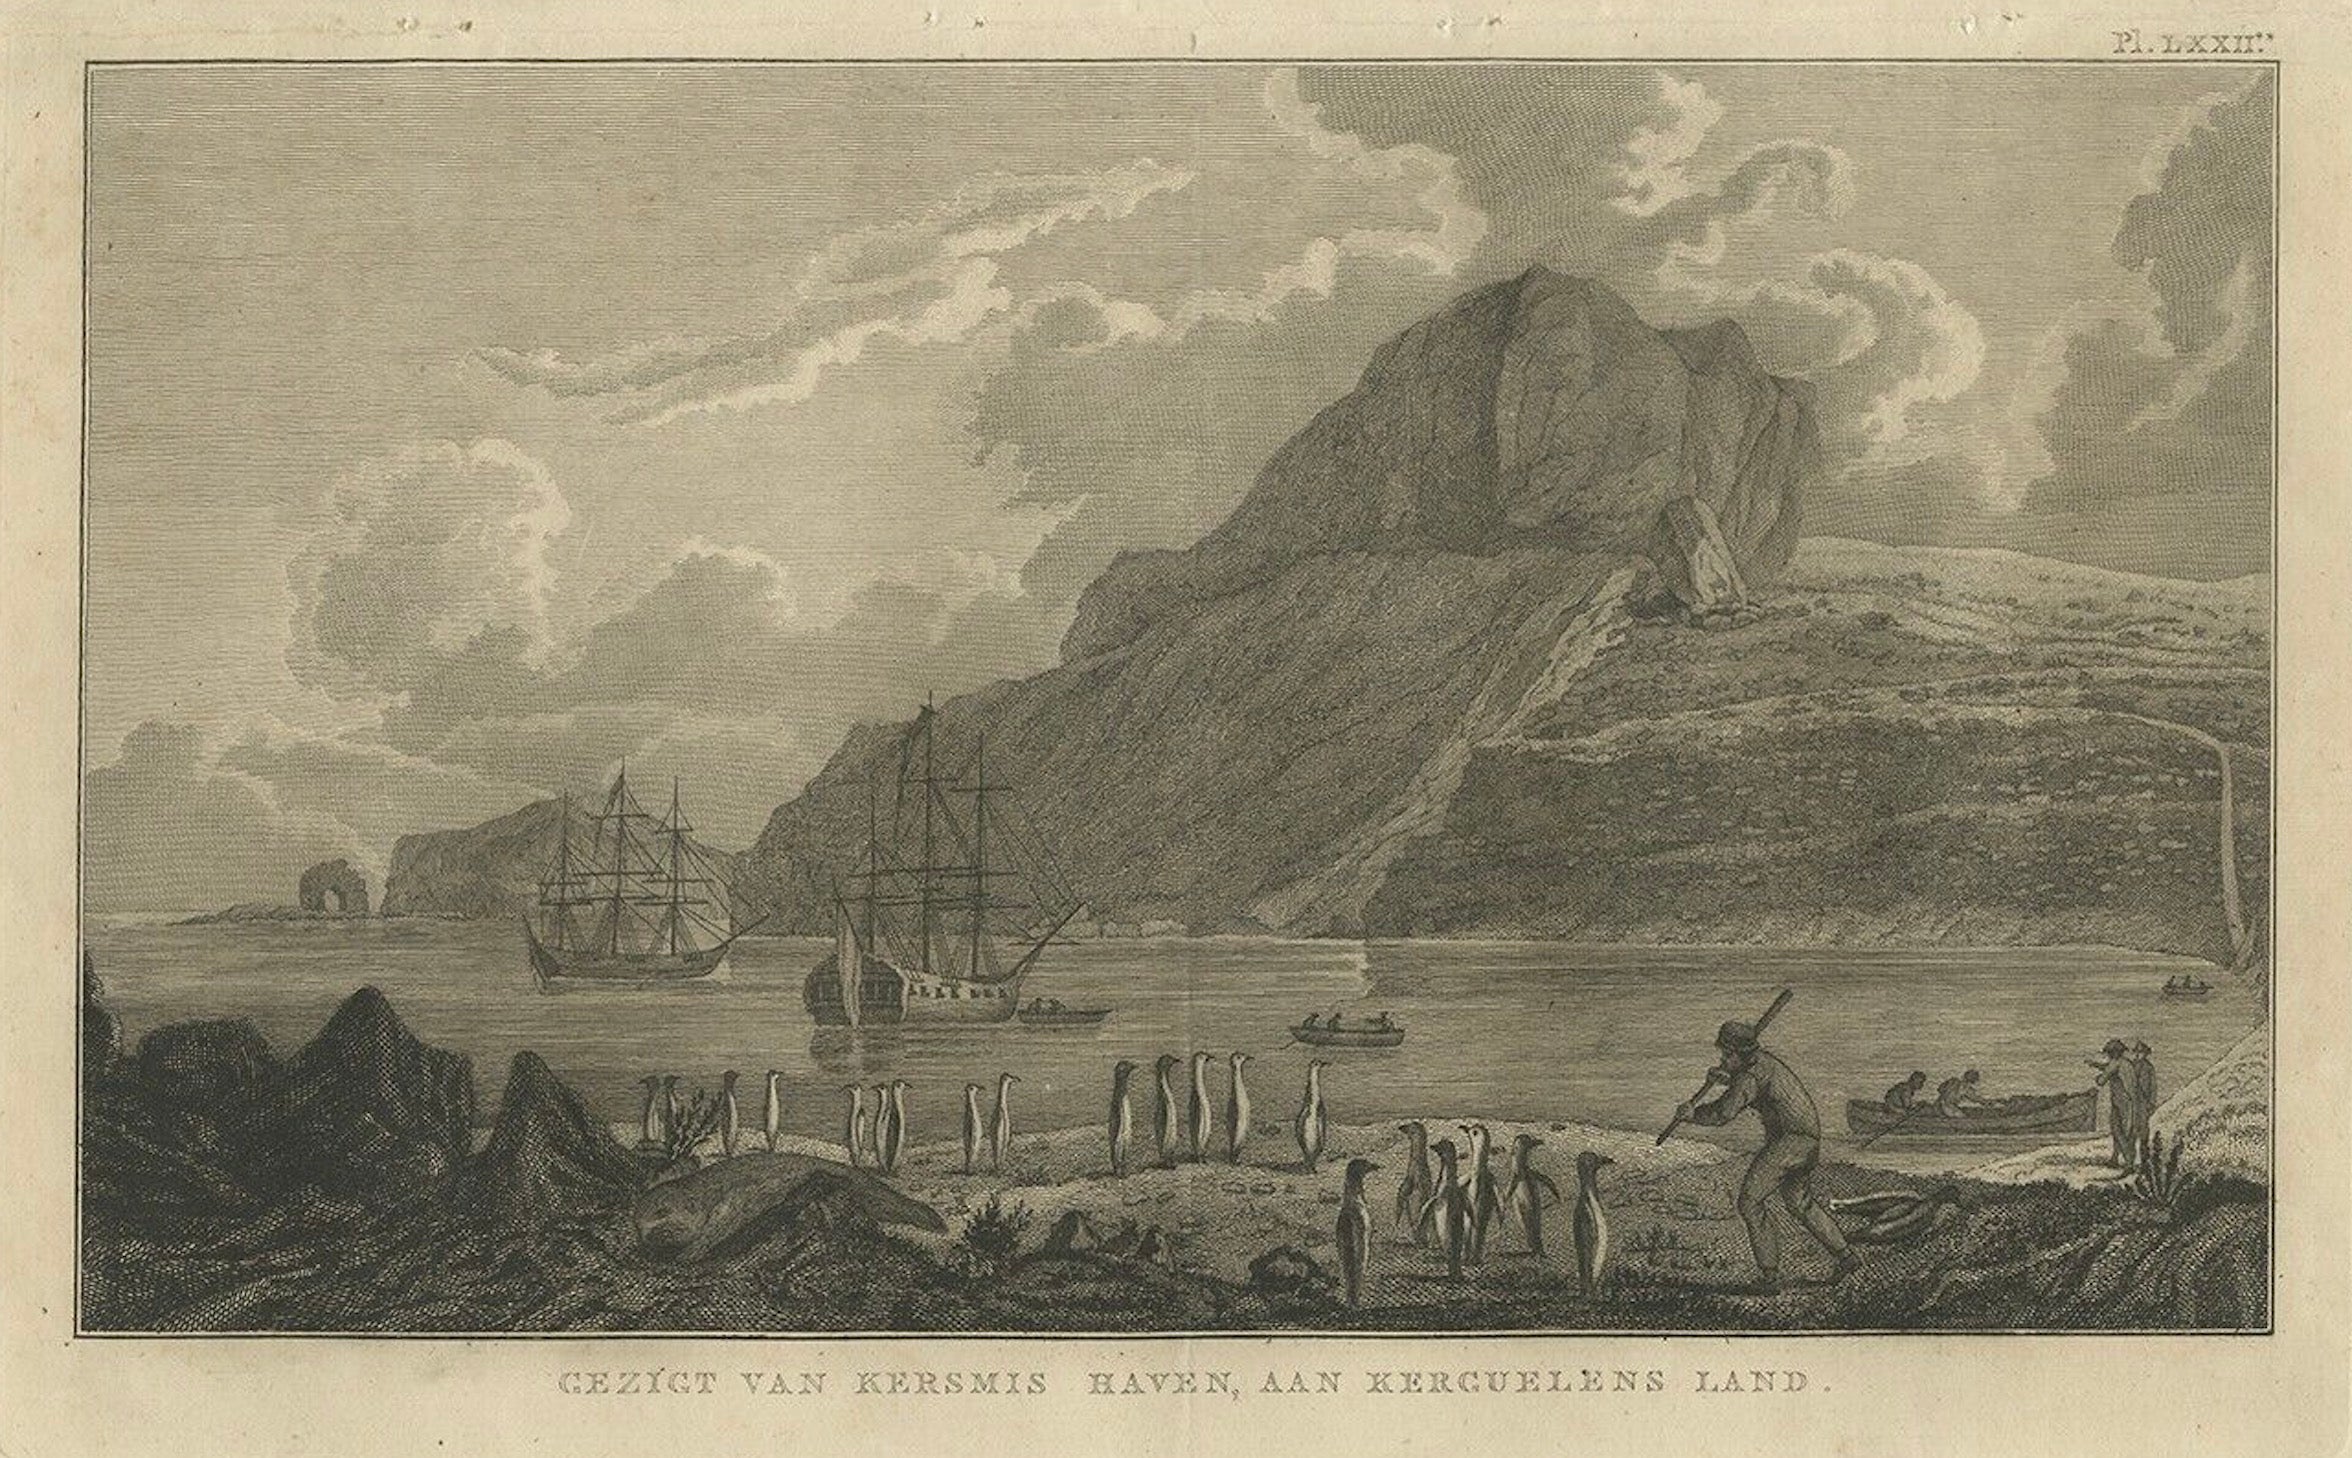 Antique Print of The Kerguelen Islands or the Desolation Islands by Cook, 1803